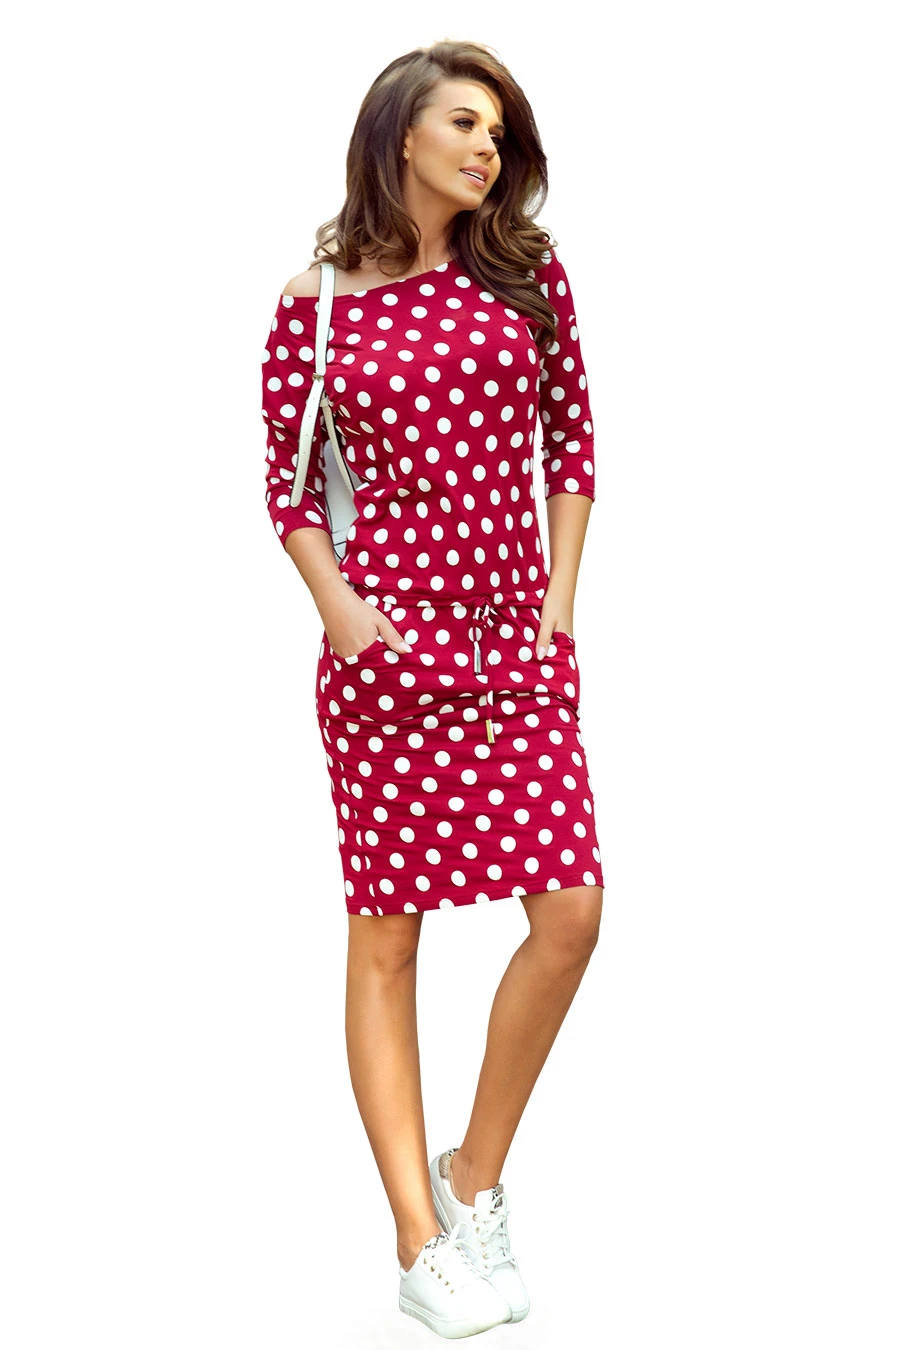 13-111 Sports dress with binding and pockets - burgundy + polka dots